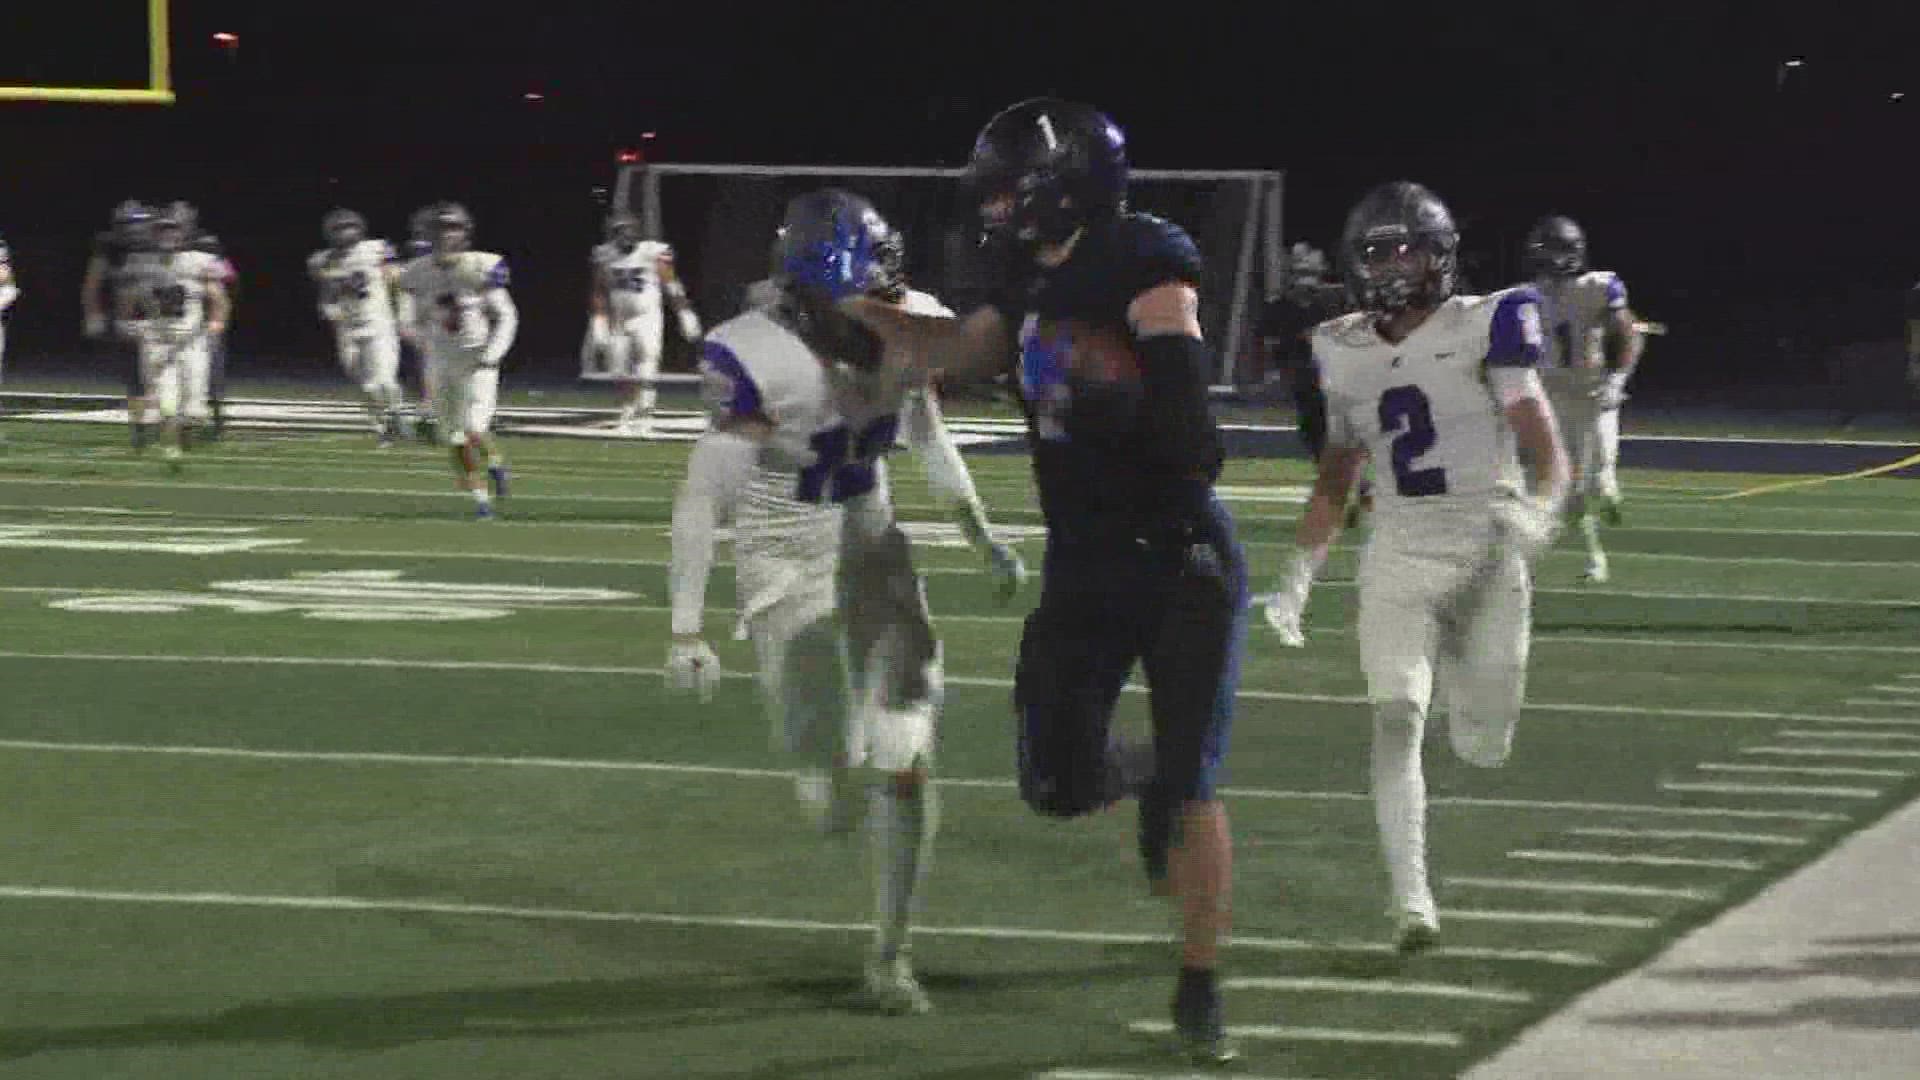 Check out the top 3 plays for Week 8 of Friday Night Fever!